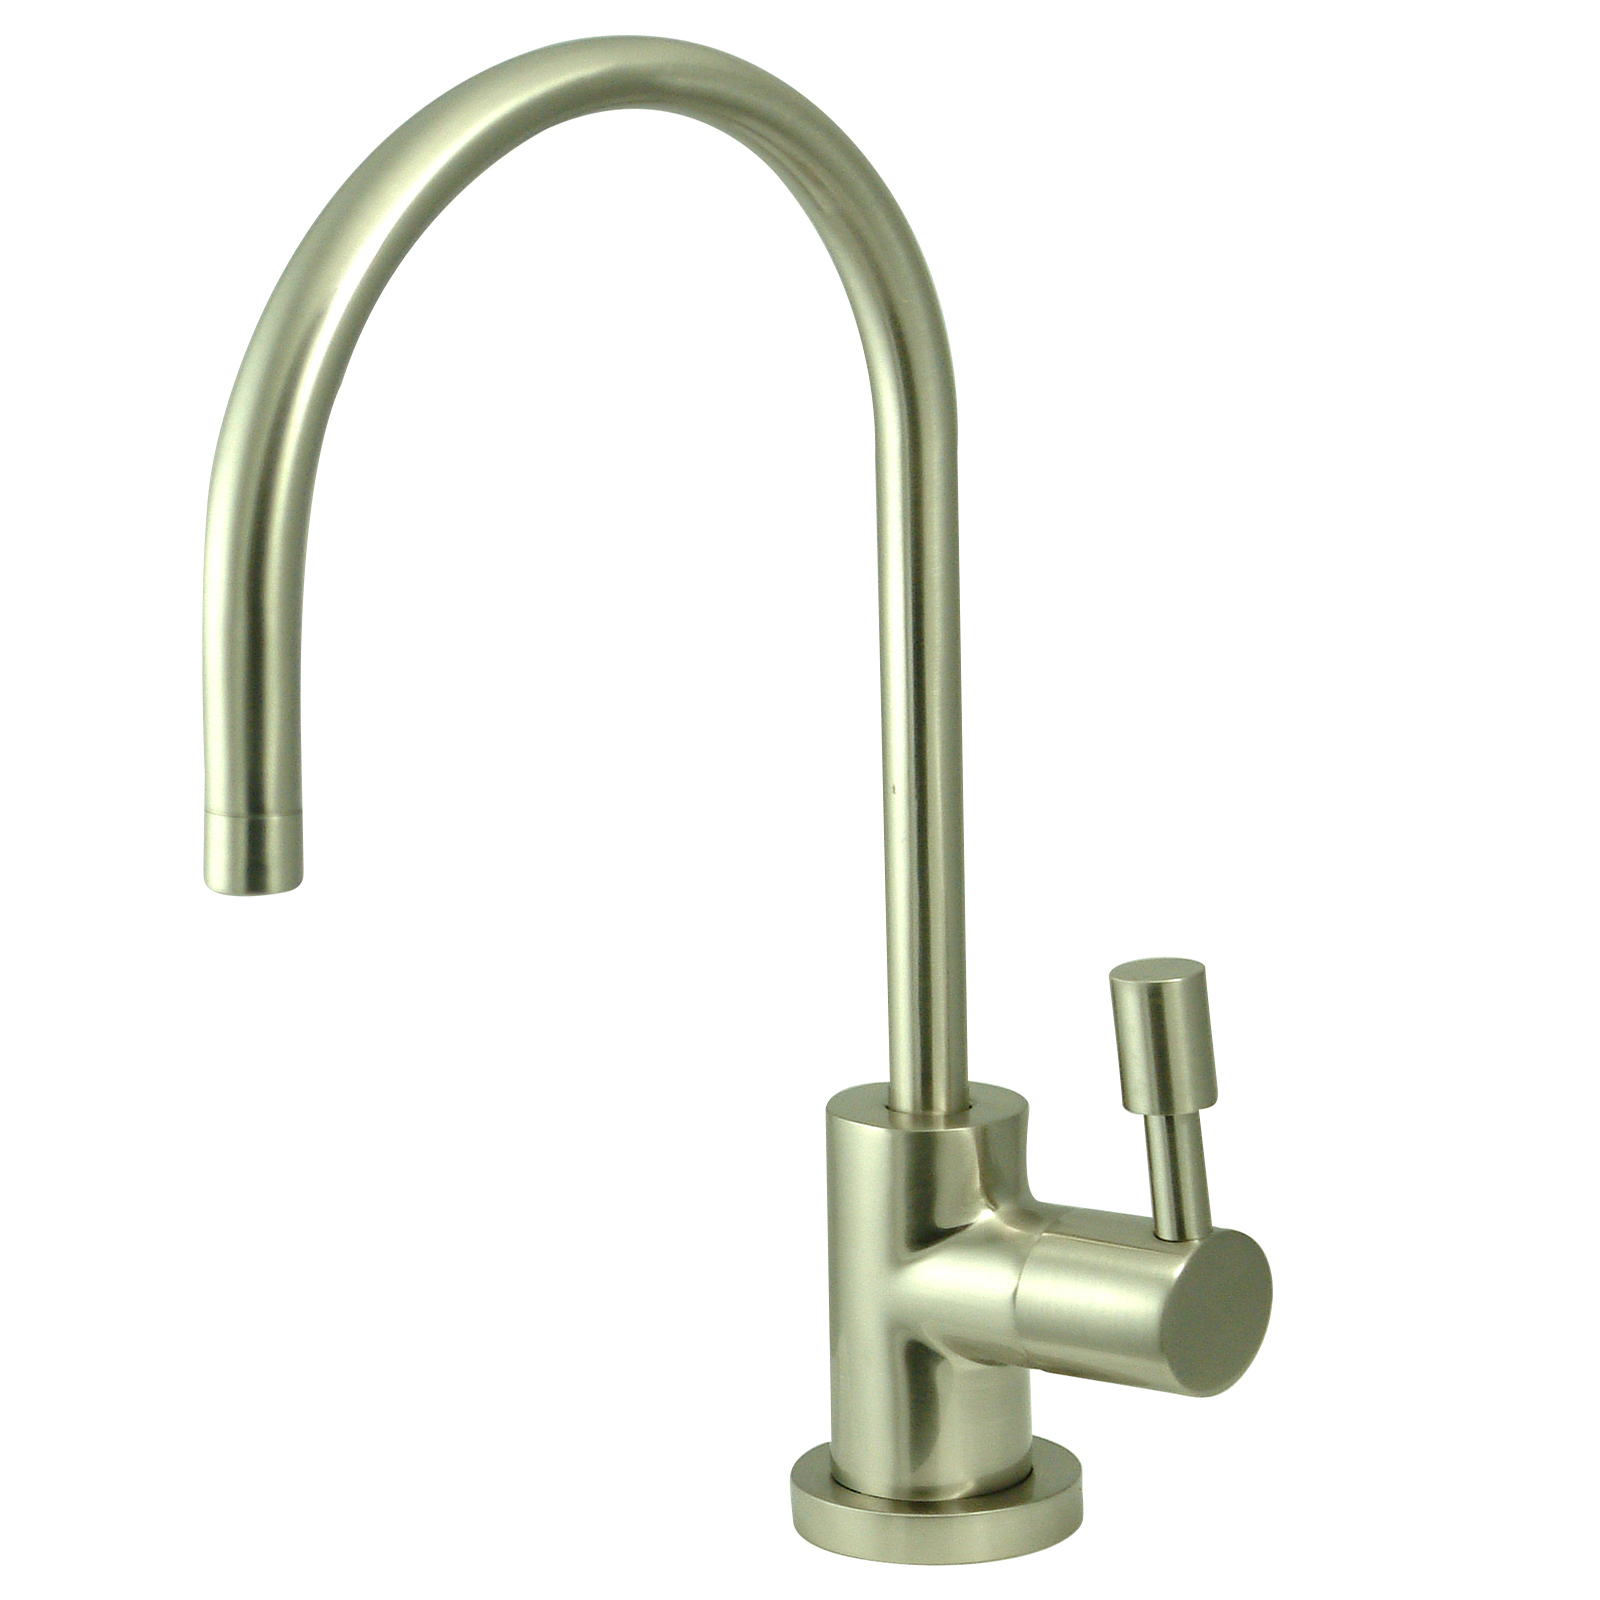 Kingston Brass KS8198DL Concord Cold Water Filtration Faucet, Satin Nickel